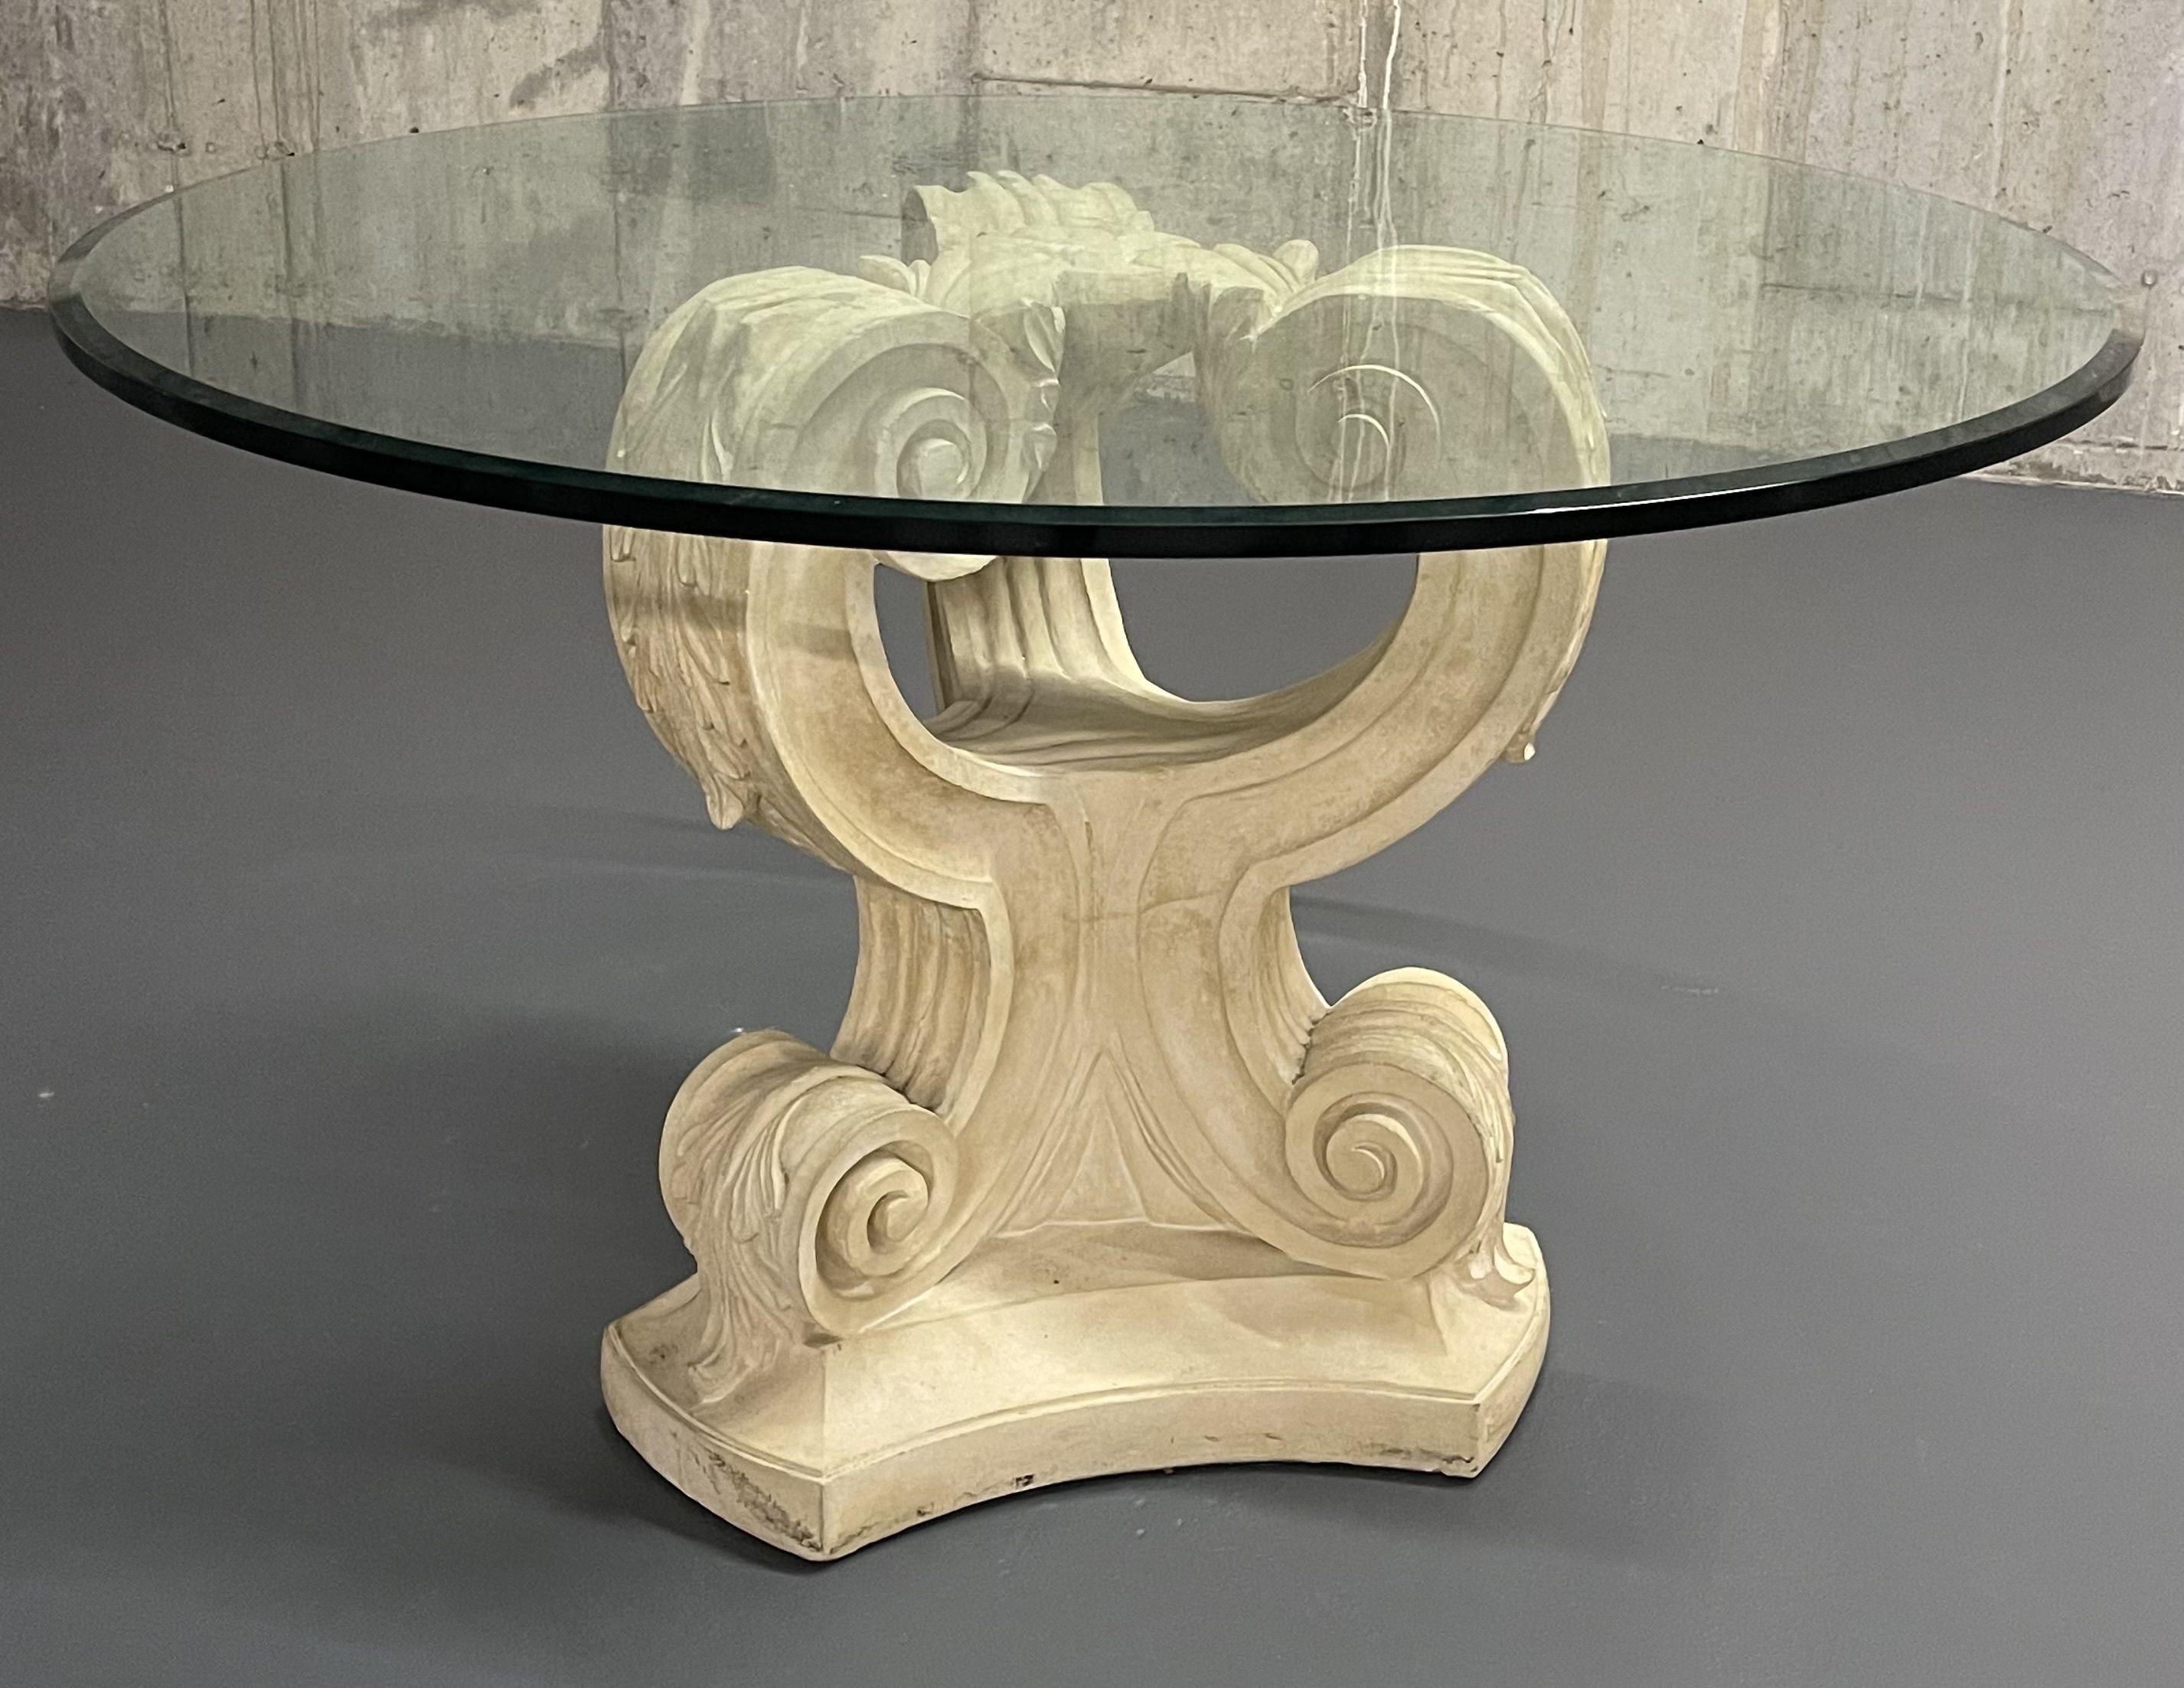 A Rococo table base of leaf and scroll design having a thick beveled glass table top. Sleek and stylish. Base measures 24 inches in diameter and 29 high.